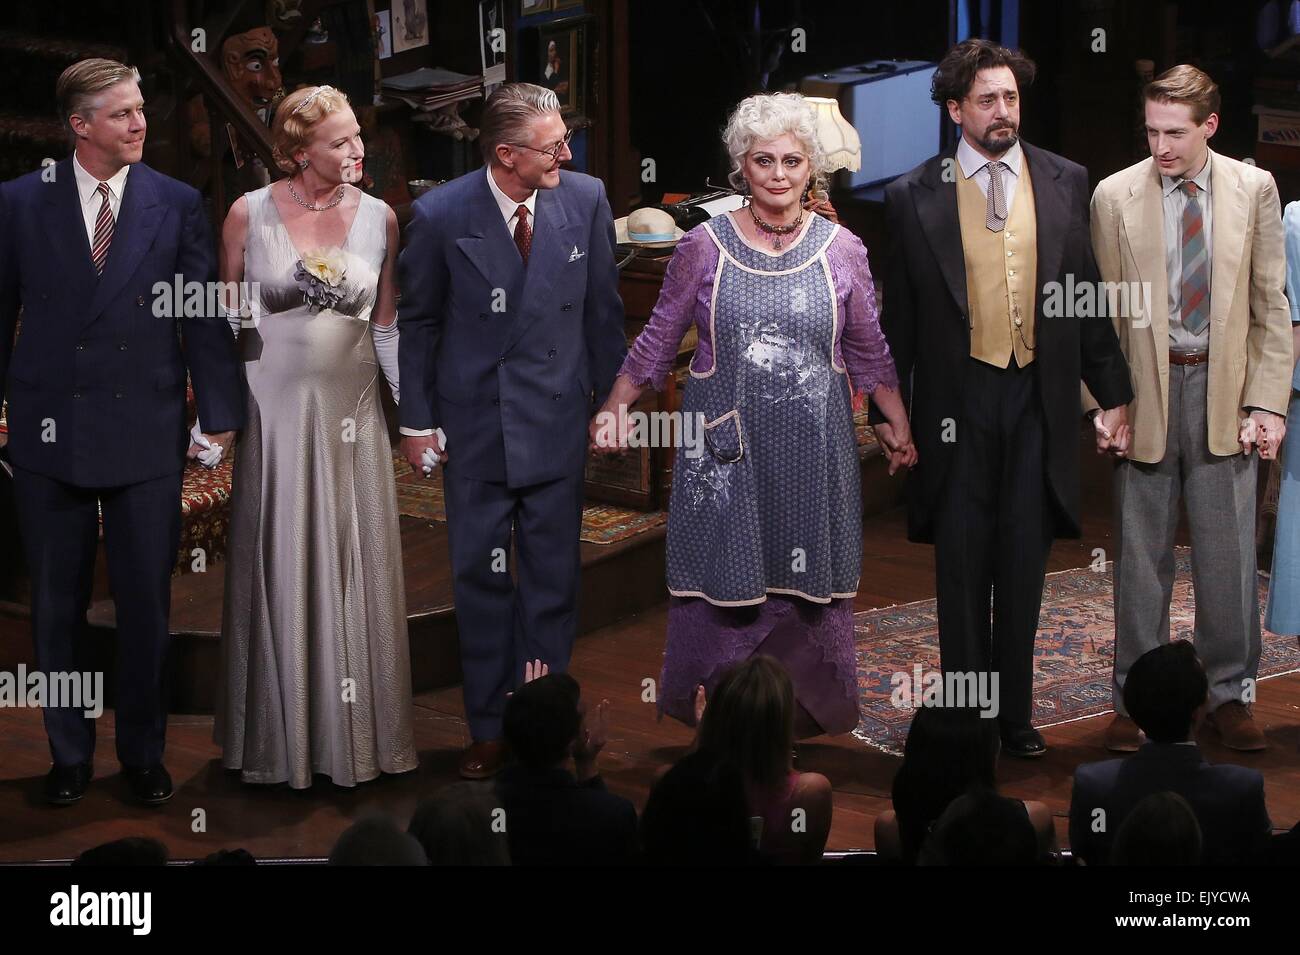 Opening night of You Can't Take It With You at the Longacre Theatre - Curtain Call. Featuring: Karl Kenzler,Johanna Day,Byron Jennings,Elizabeth Ashley,Reg Rogers,Fran Kranz Where: New York, New York, United States When: 28 Sep 2014 Stock Photo